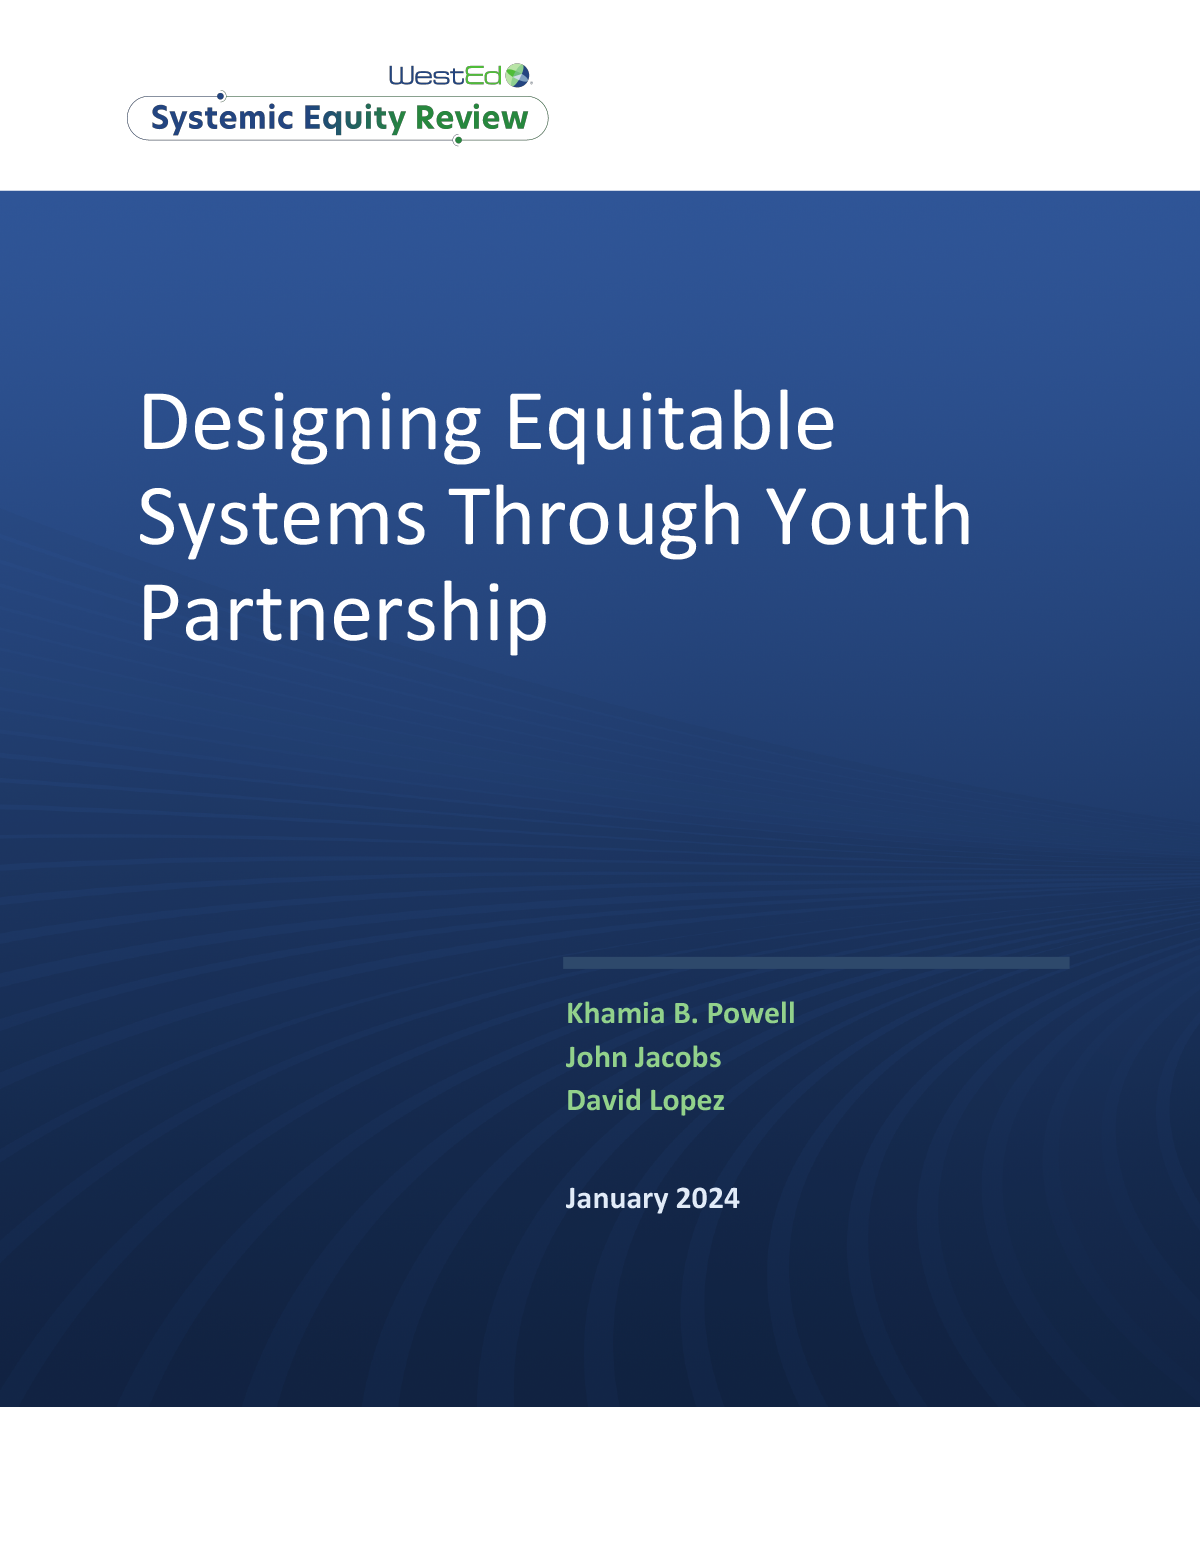 Designing Equitable Systems Through Youth Partnership